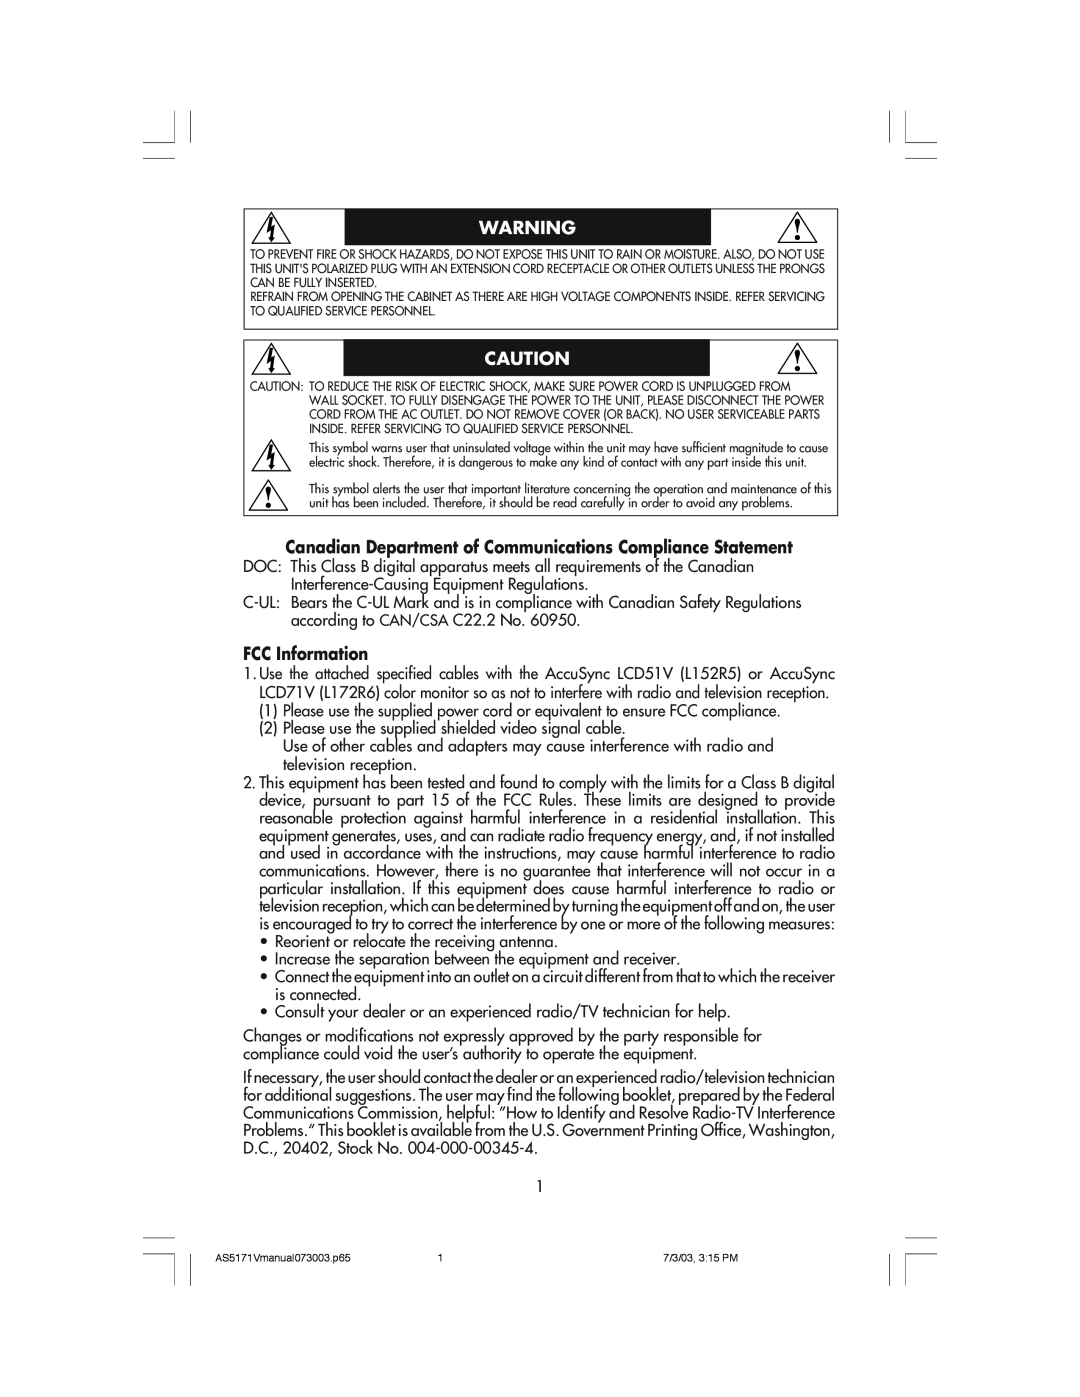 NEC LCD71V manual Canadian Department of Communications Compliance Statement, FCC Information 